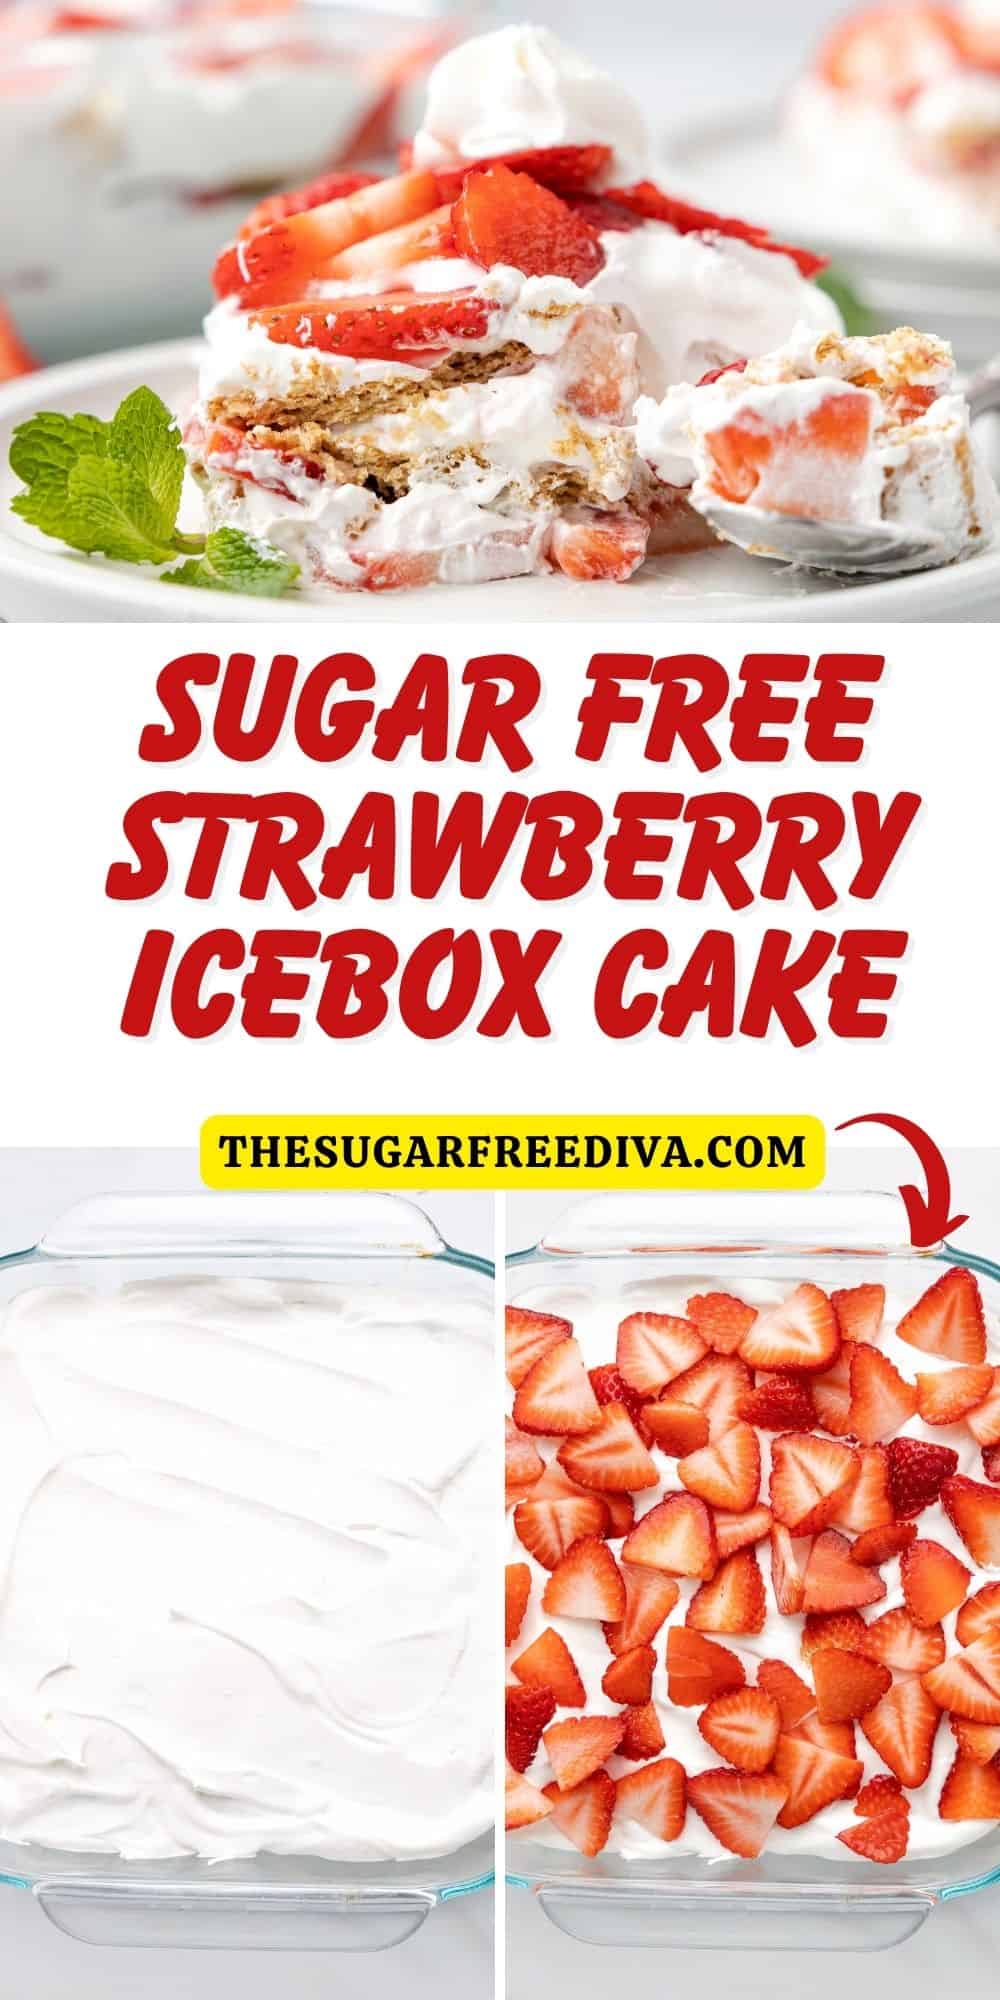 Sugar Free Strawberry Icebox Cake, a classic and simple layered dessert recipe made with fresh strawberries and no added sugar.